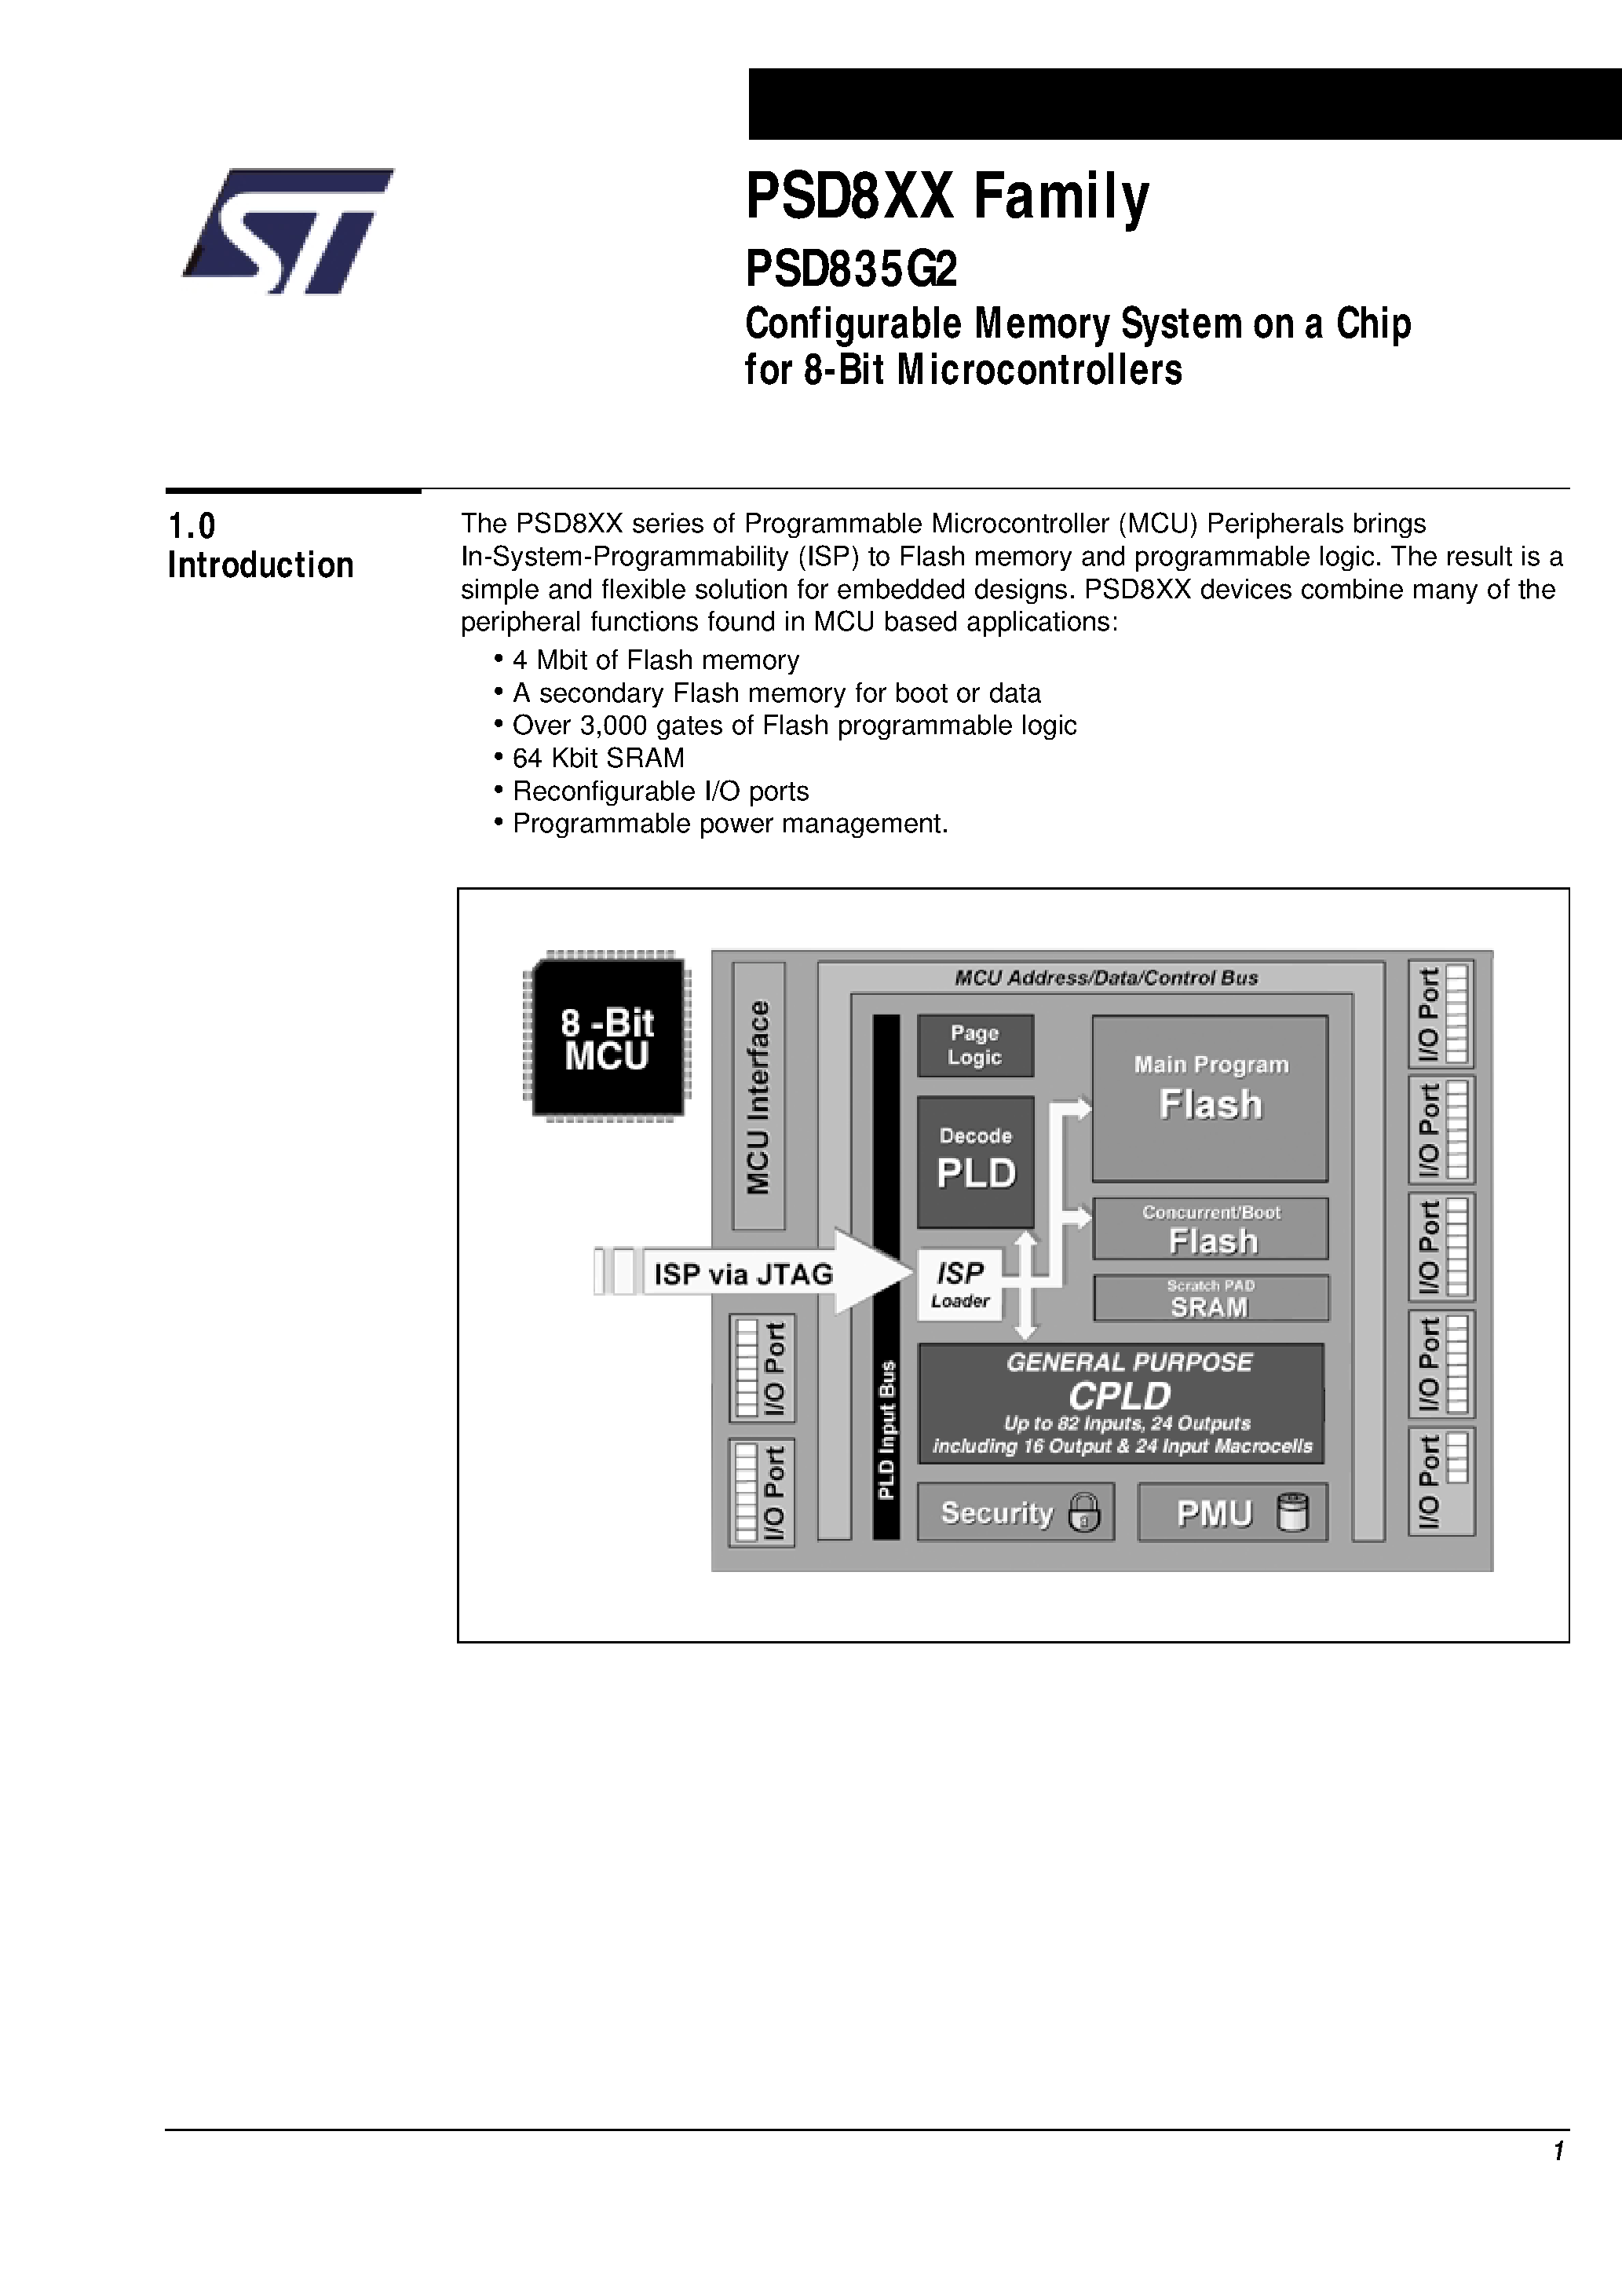 Datasheet PSD835F2-A-12B81 - Configurable Memory System on a Chip for 8-Bit Microcontrollers page 2